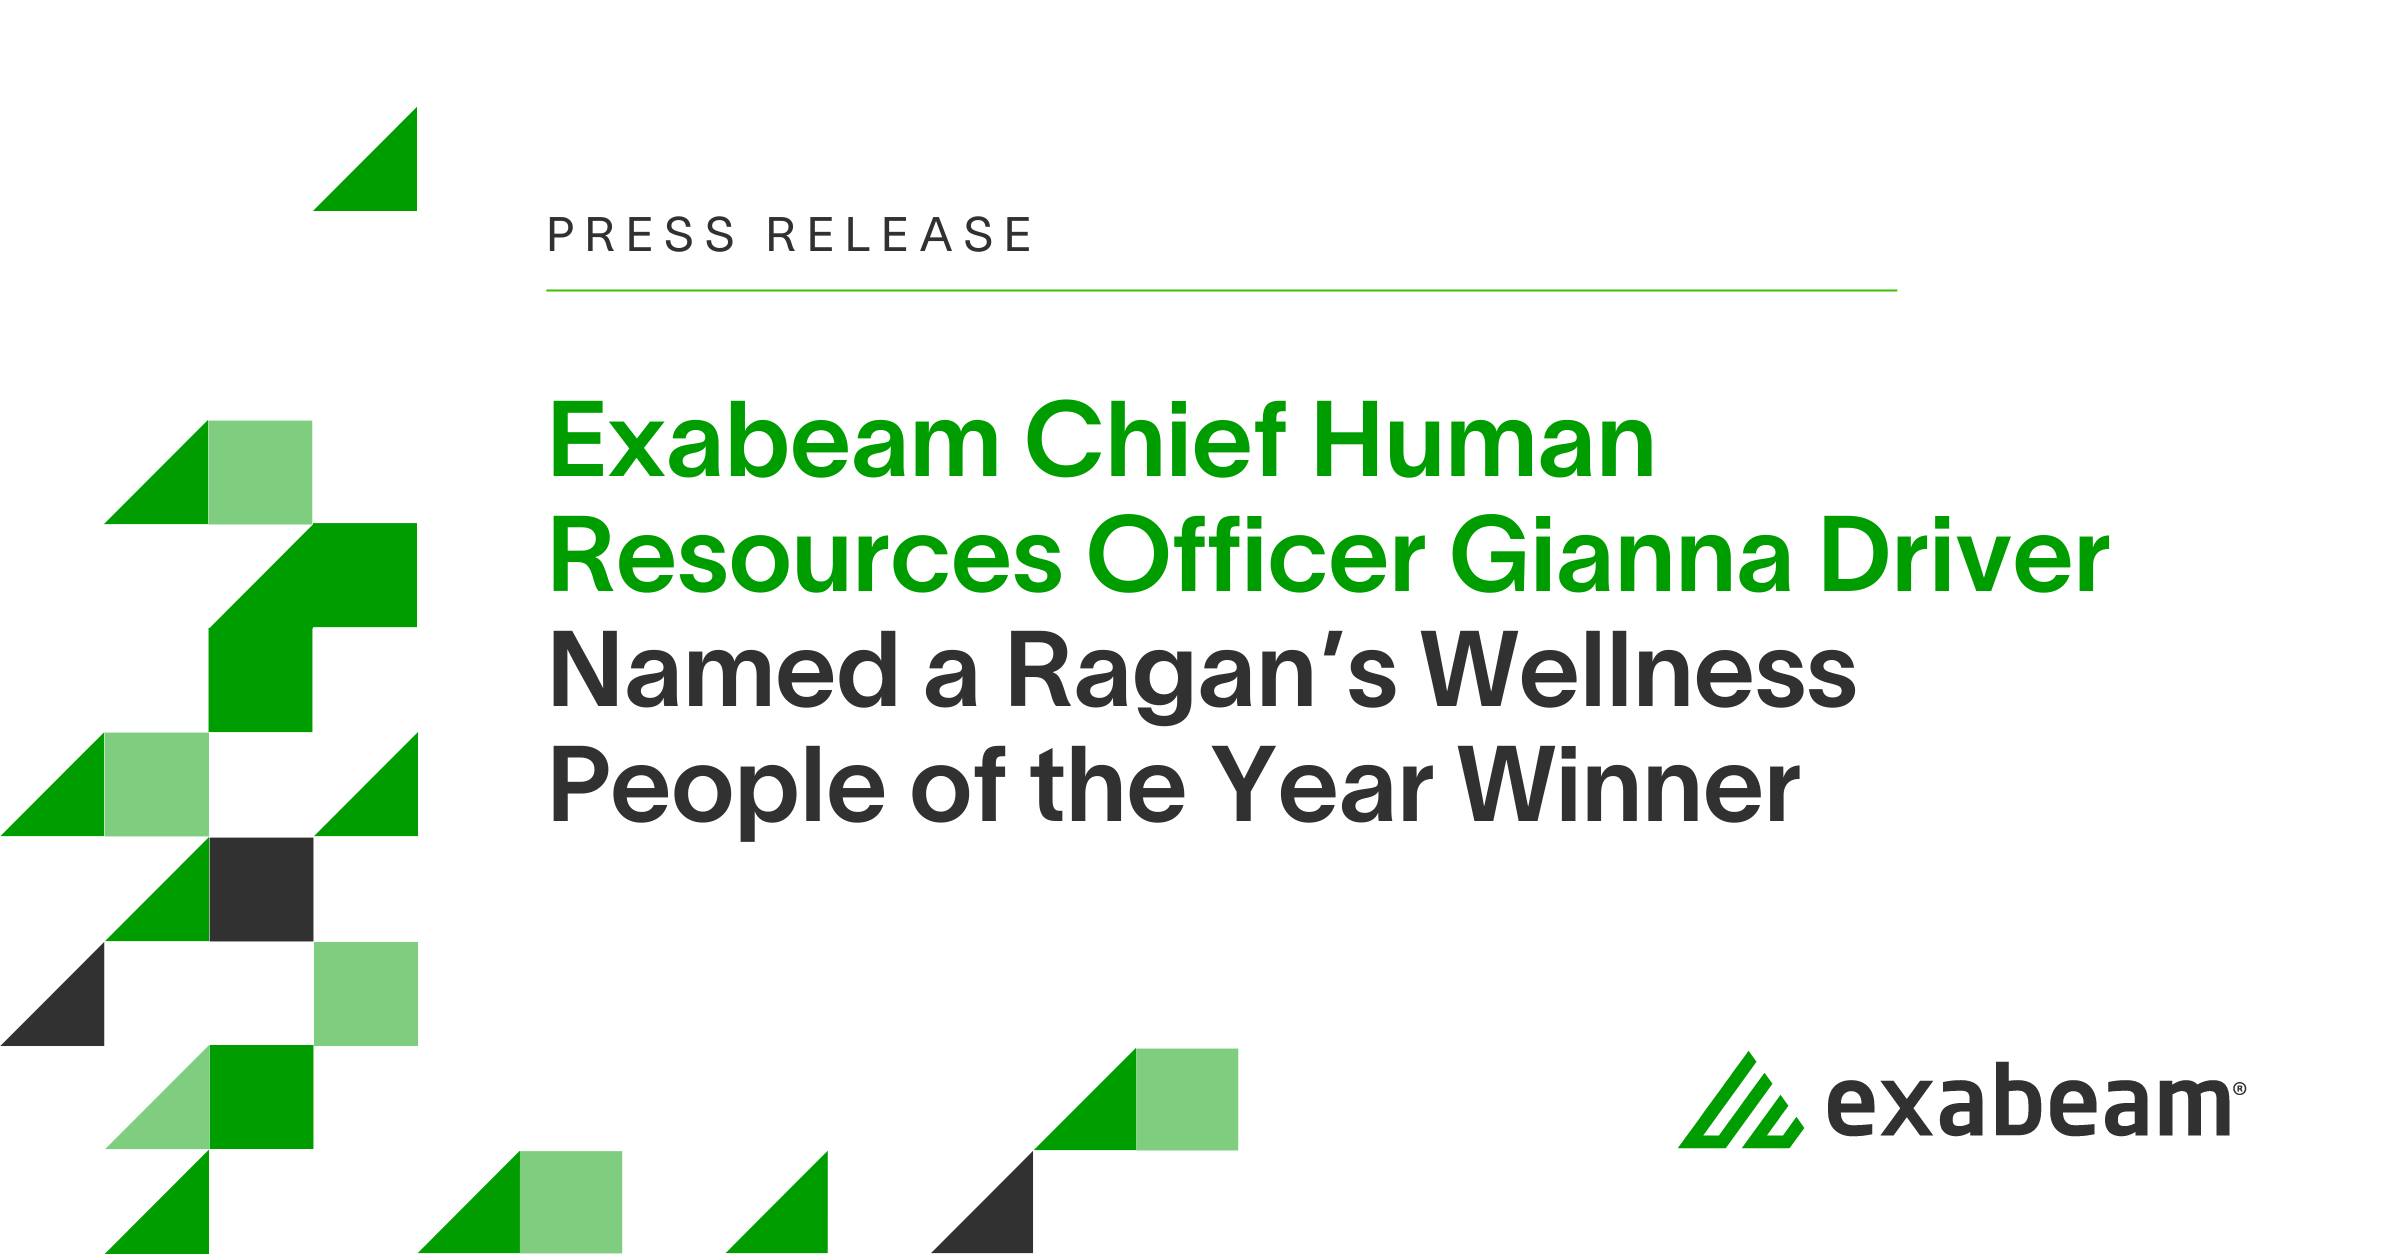 Exabeam Chief Human Resources Officer Gianna Driver Named a Ragan’s Wellness People of the Year Winner